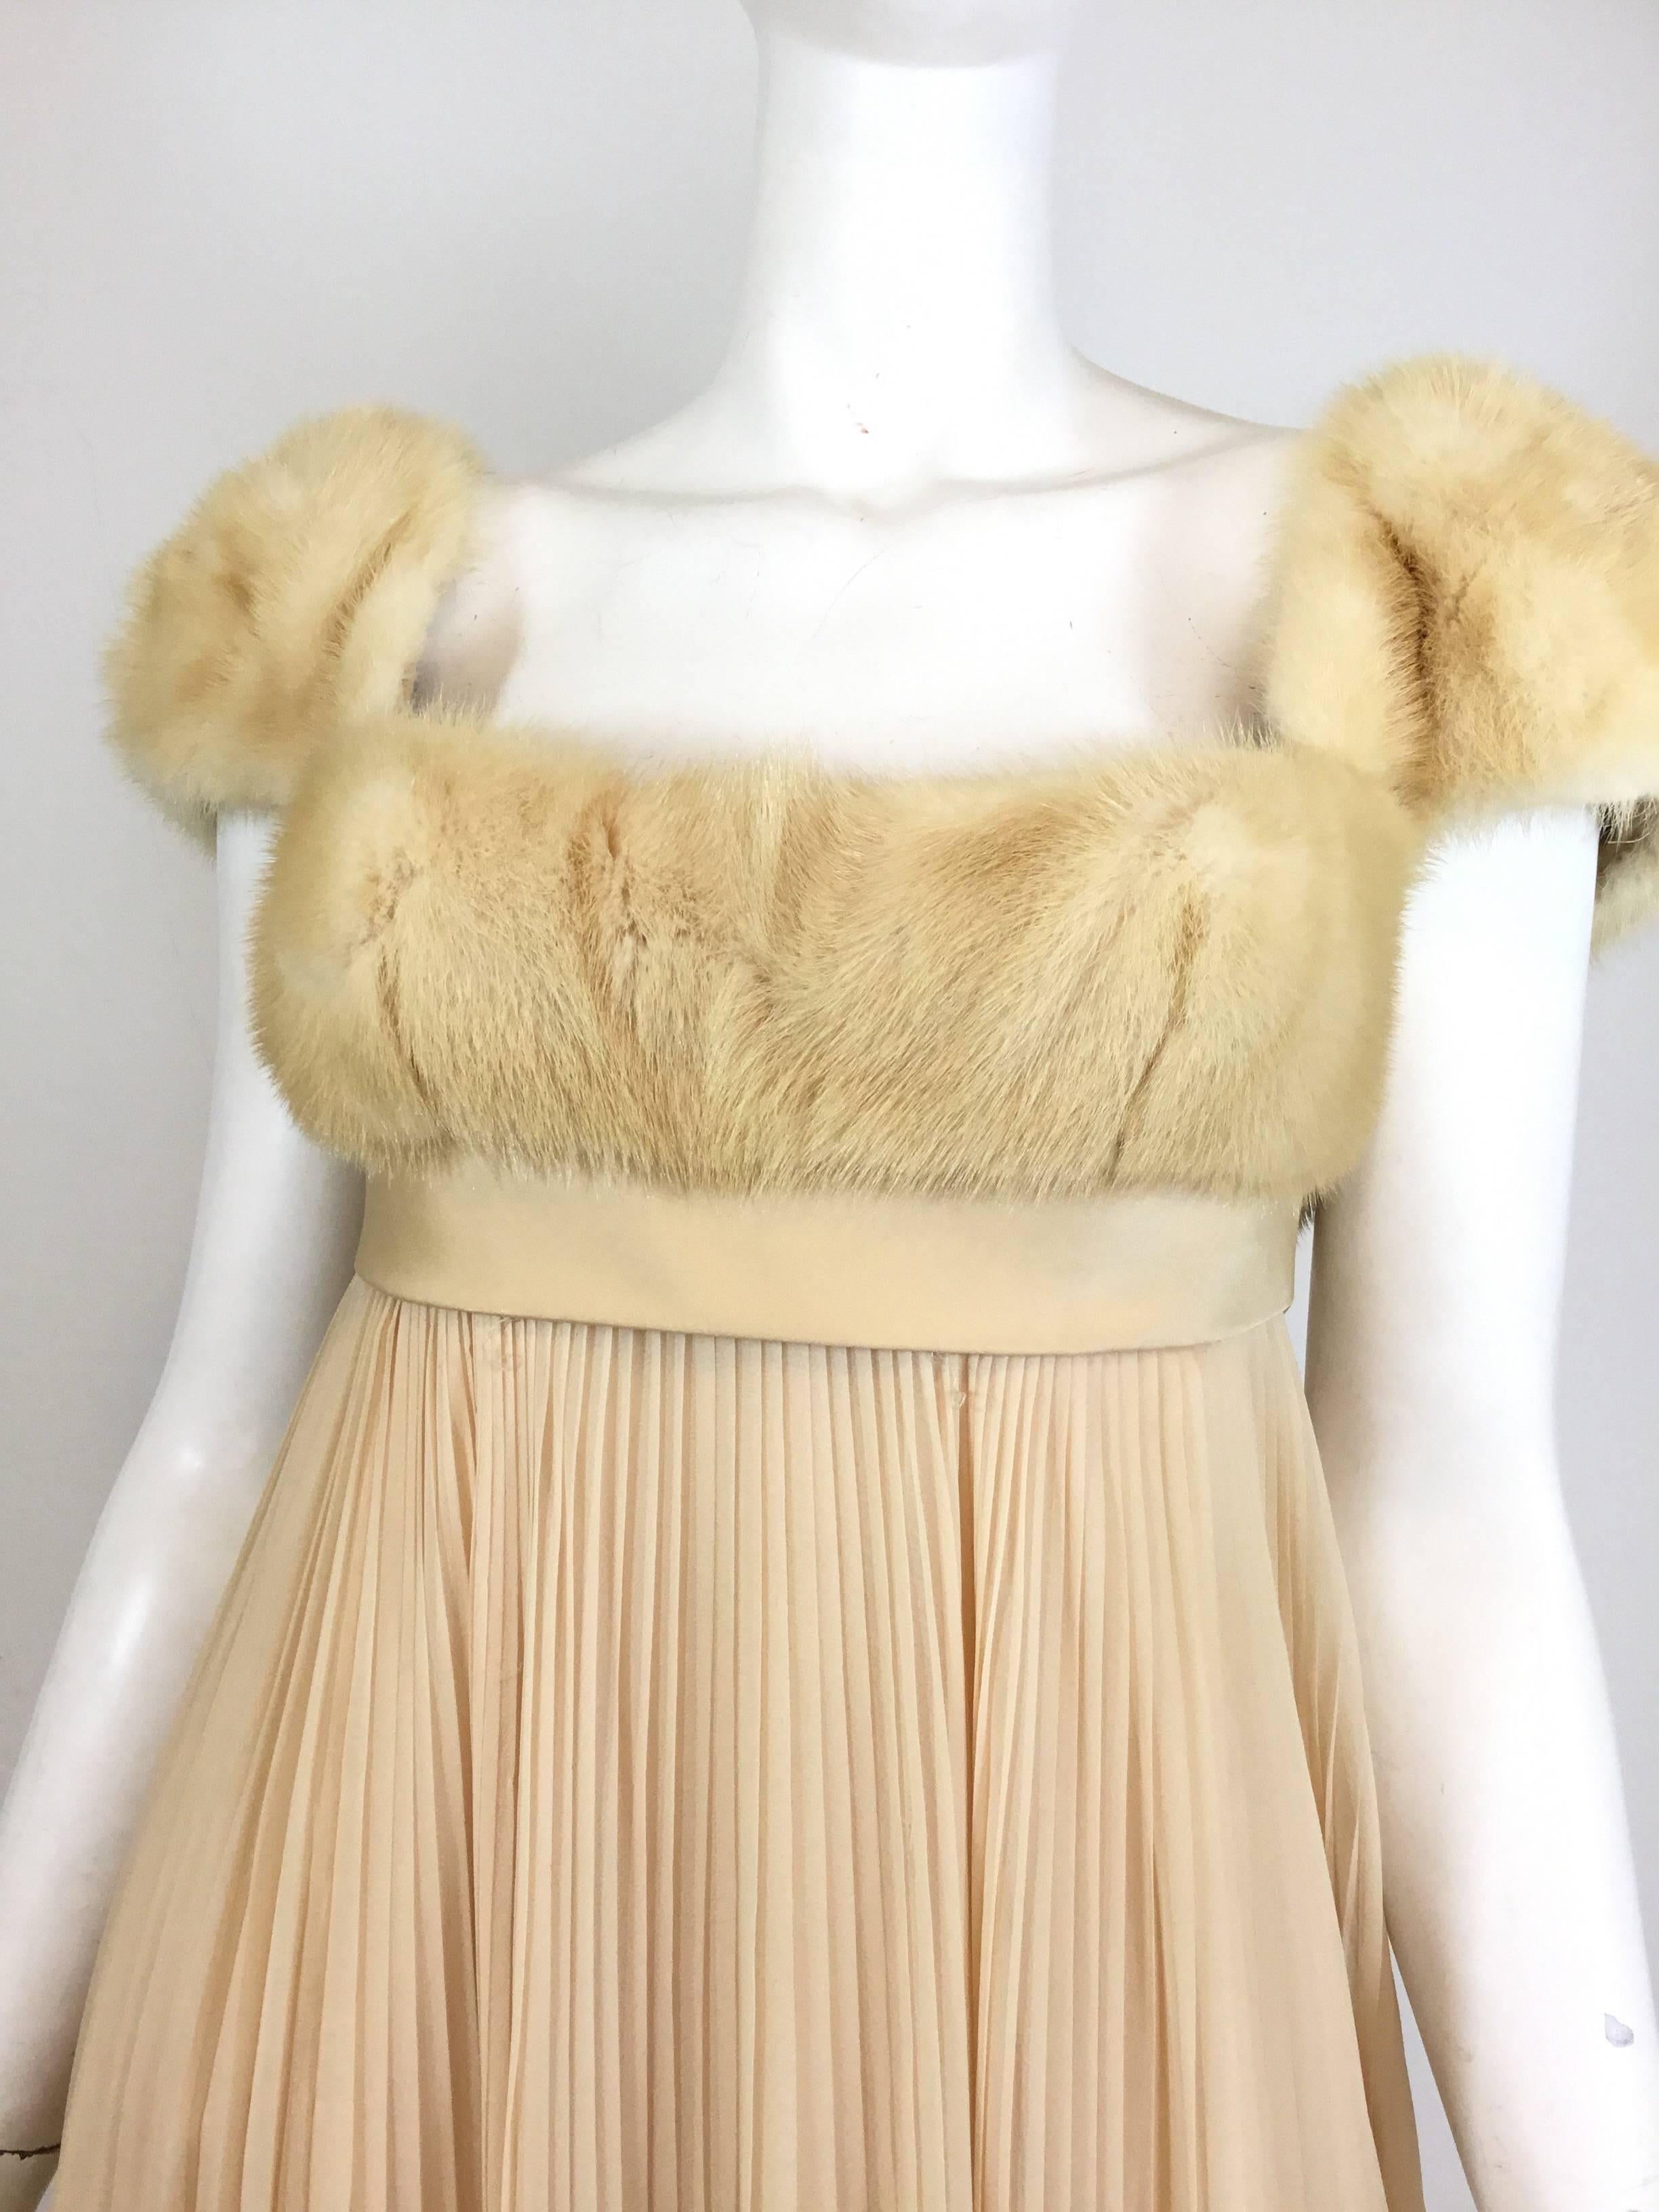 Gorgeous Sarmi gown featured in a cream/beige color with mink fur bust and sleeves. Skirt has a pleated silk chiffon design with a back zipper and hook-and-eye fastening. Gown is fully lined. There is some discoloration on the silk chiffon at the